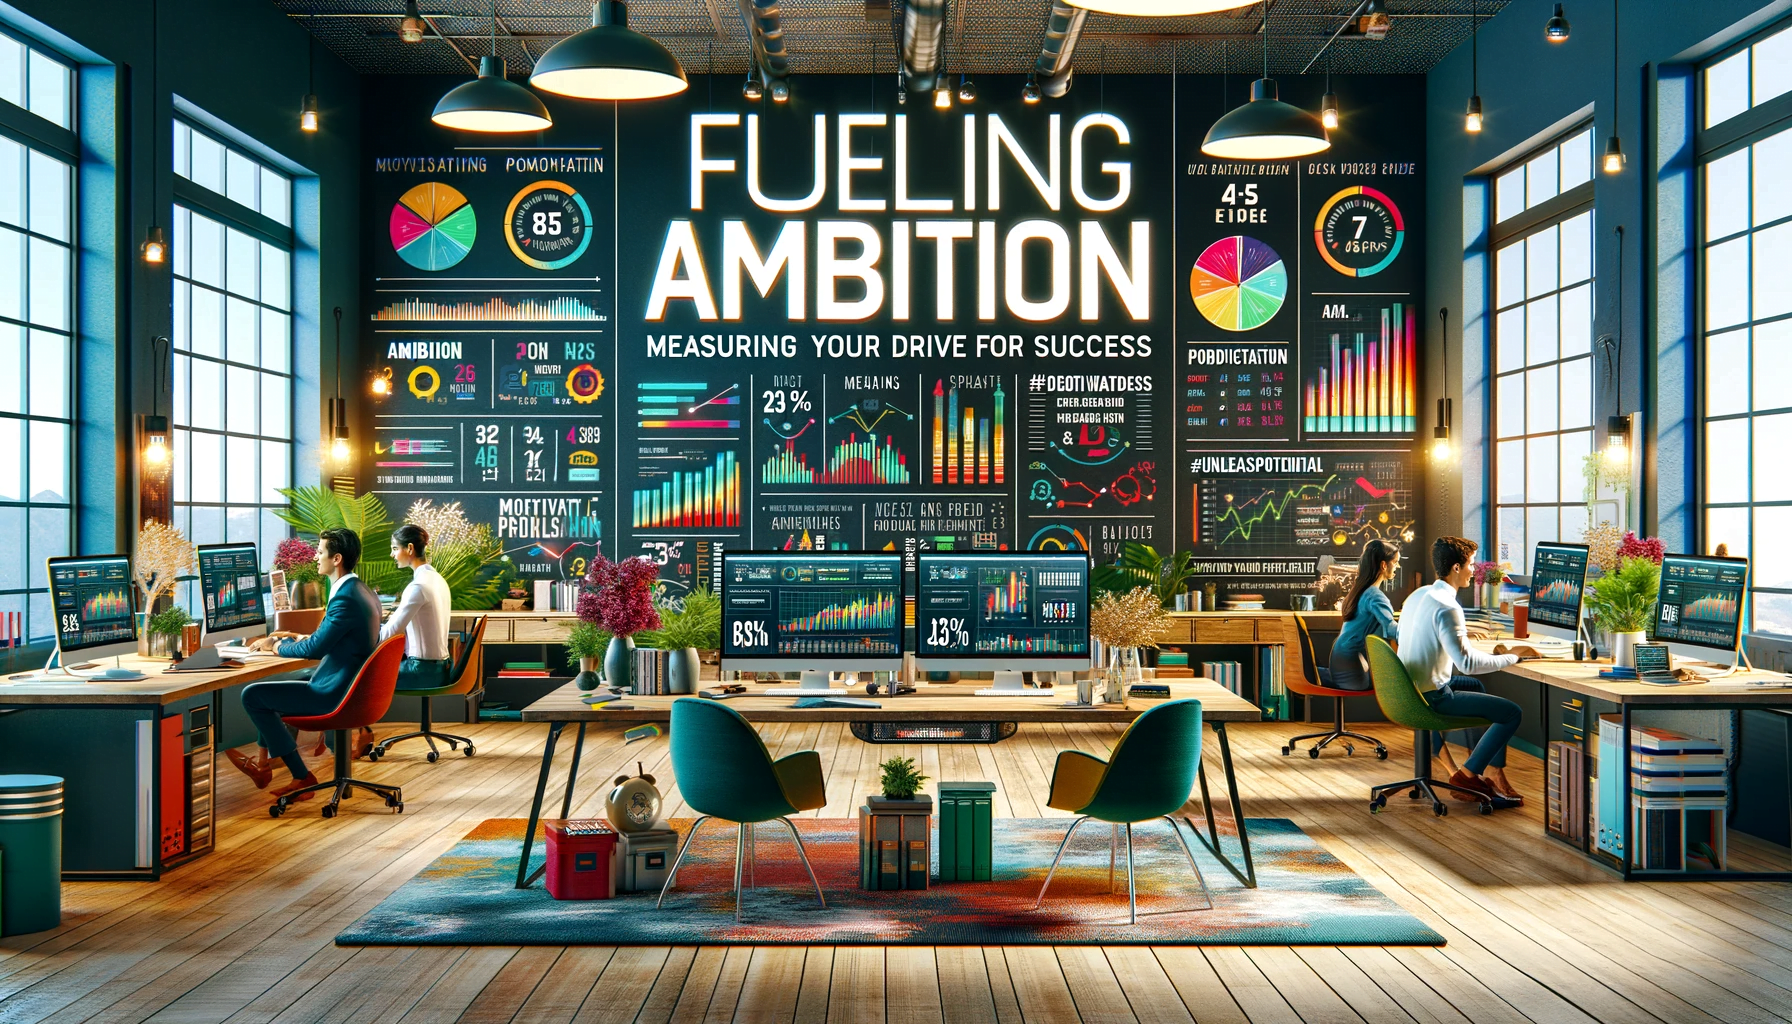 Fueling Ambition: Measuring Your Drive for Success